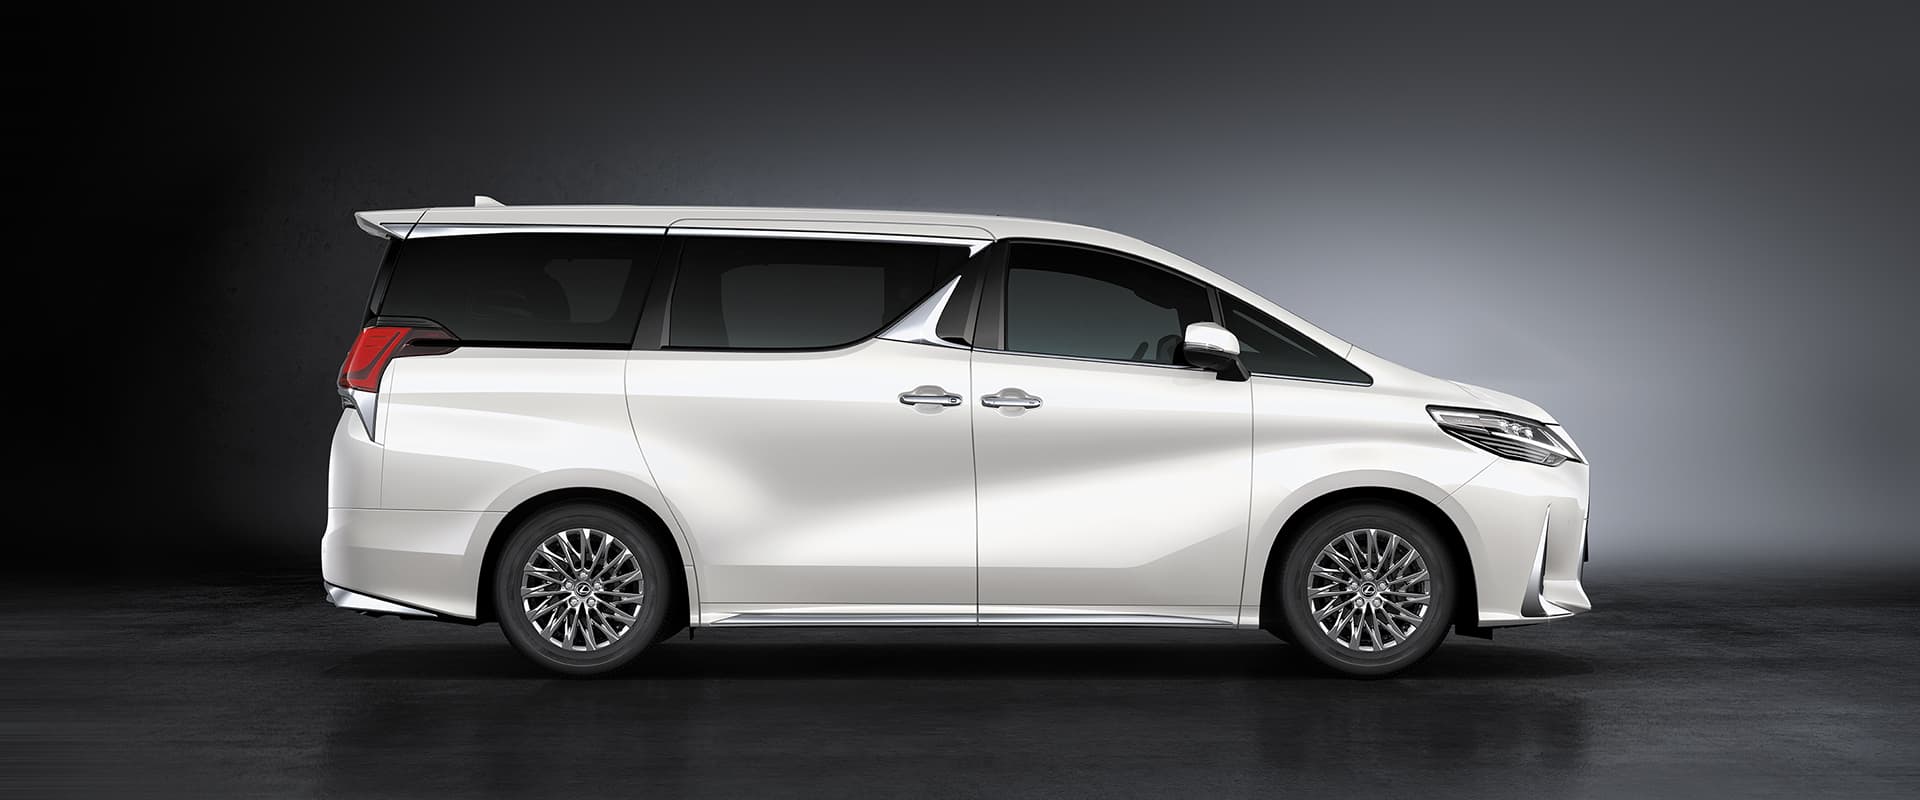 New Lexus LM Ultra-Luxurious MPV Makes Official Debut - Looks Fantabulous! - right